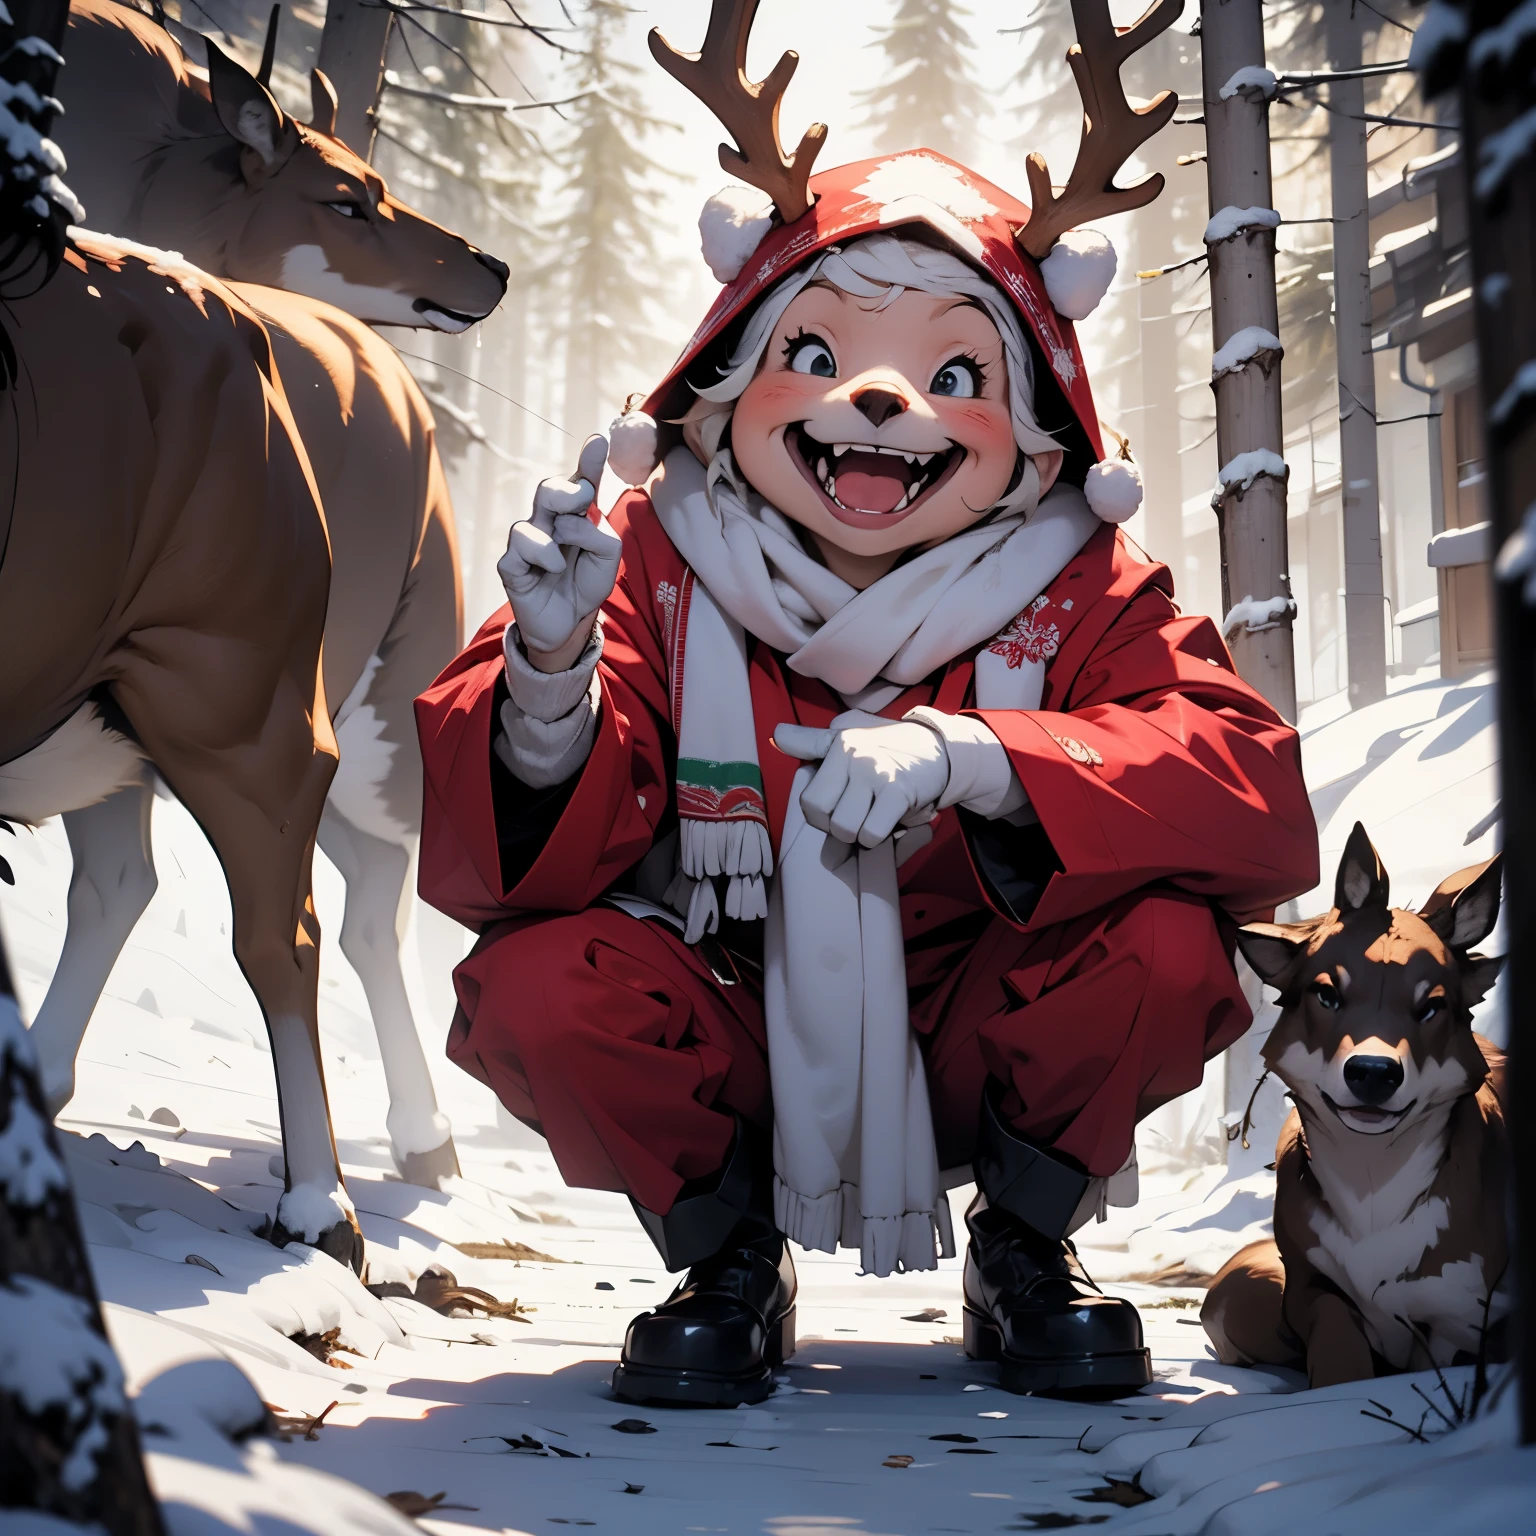 Merry Christmas, Snow Maiden in a sexy red suit feeds a deer with bread and smiles, forest with trees, garlands on branches